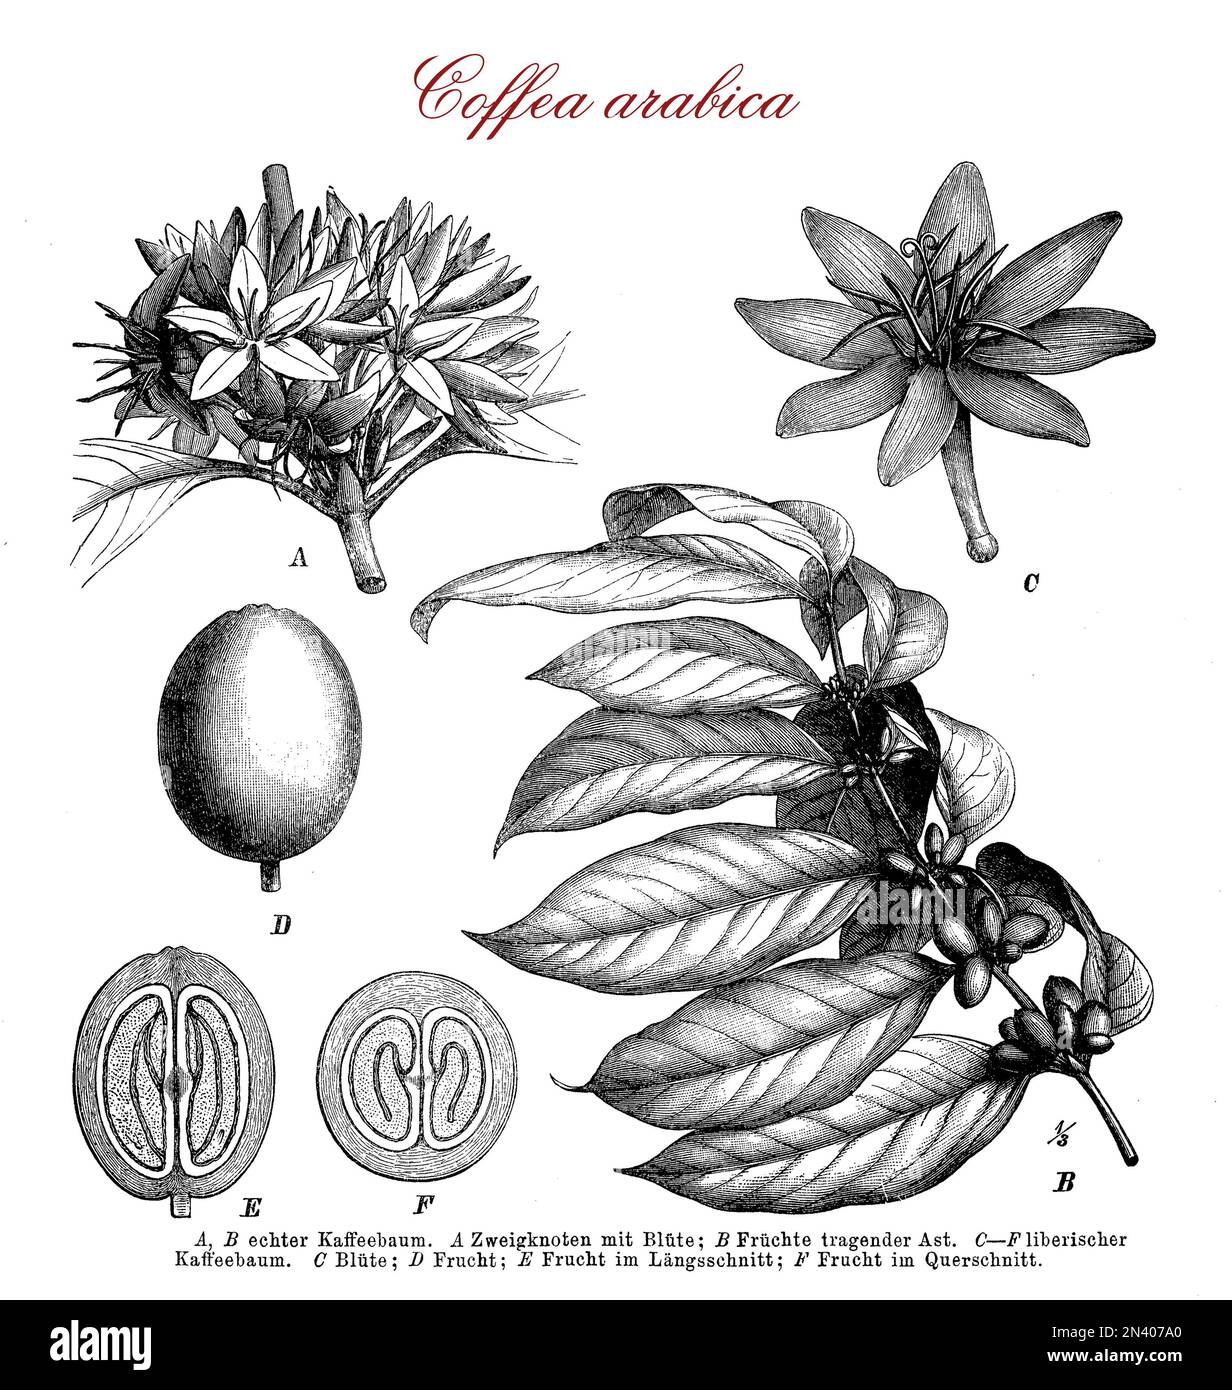 Vintage engraving of Coffea arabica (coffee plant) botanical morphology:the leaves, the flowers and the berries containing 2 coffee beans each. Arabica native to Ethiopia is first species of coffee to have been cultivated. Stock Photo